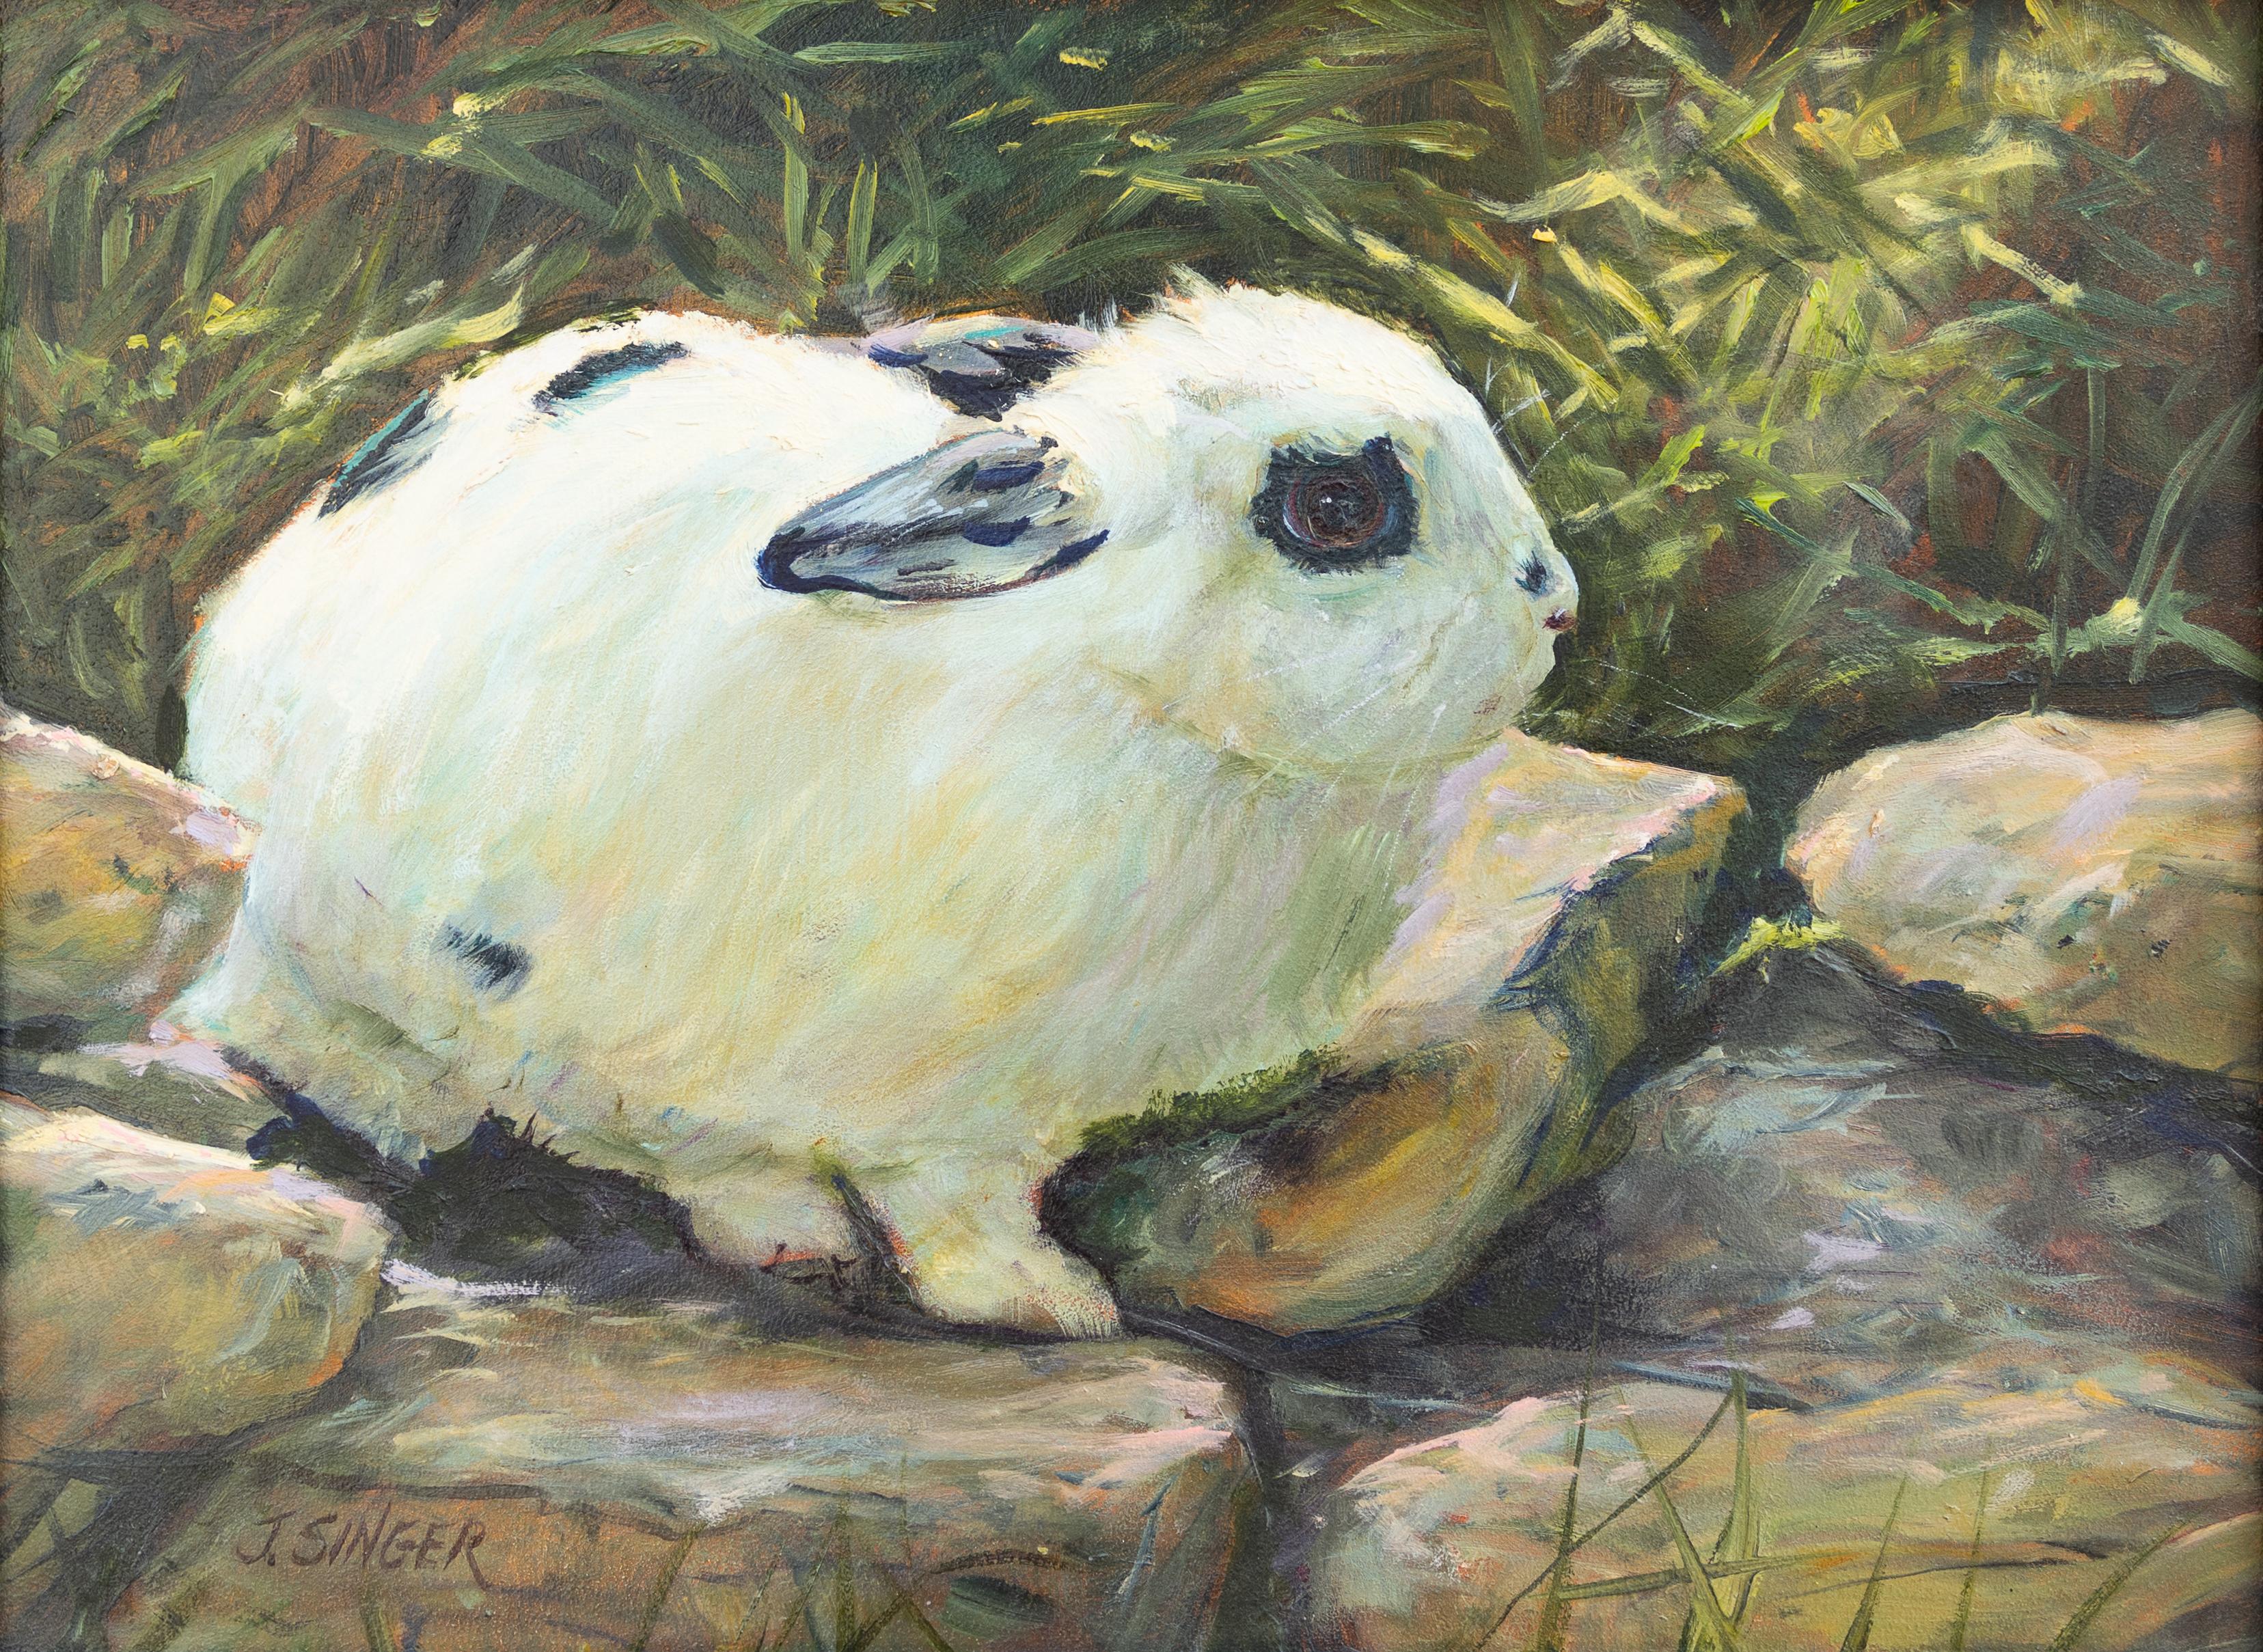 Jean Singer Animal Painting - "Bunny on the Rocks" Cute Nature Rabbit Landscape Hare Furry Friend Pet Sweet